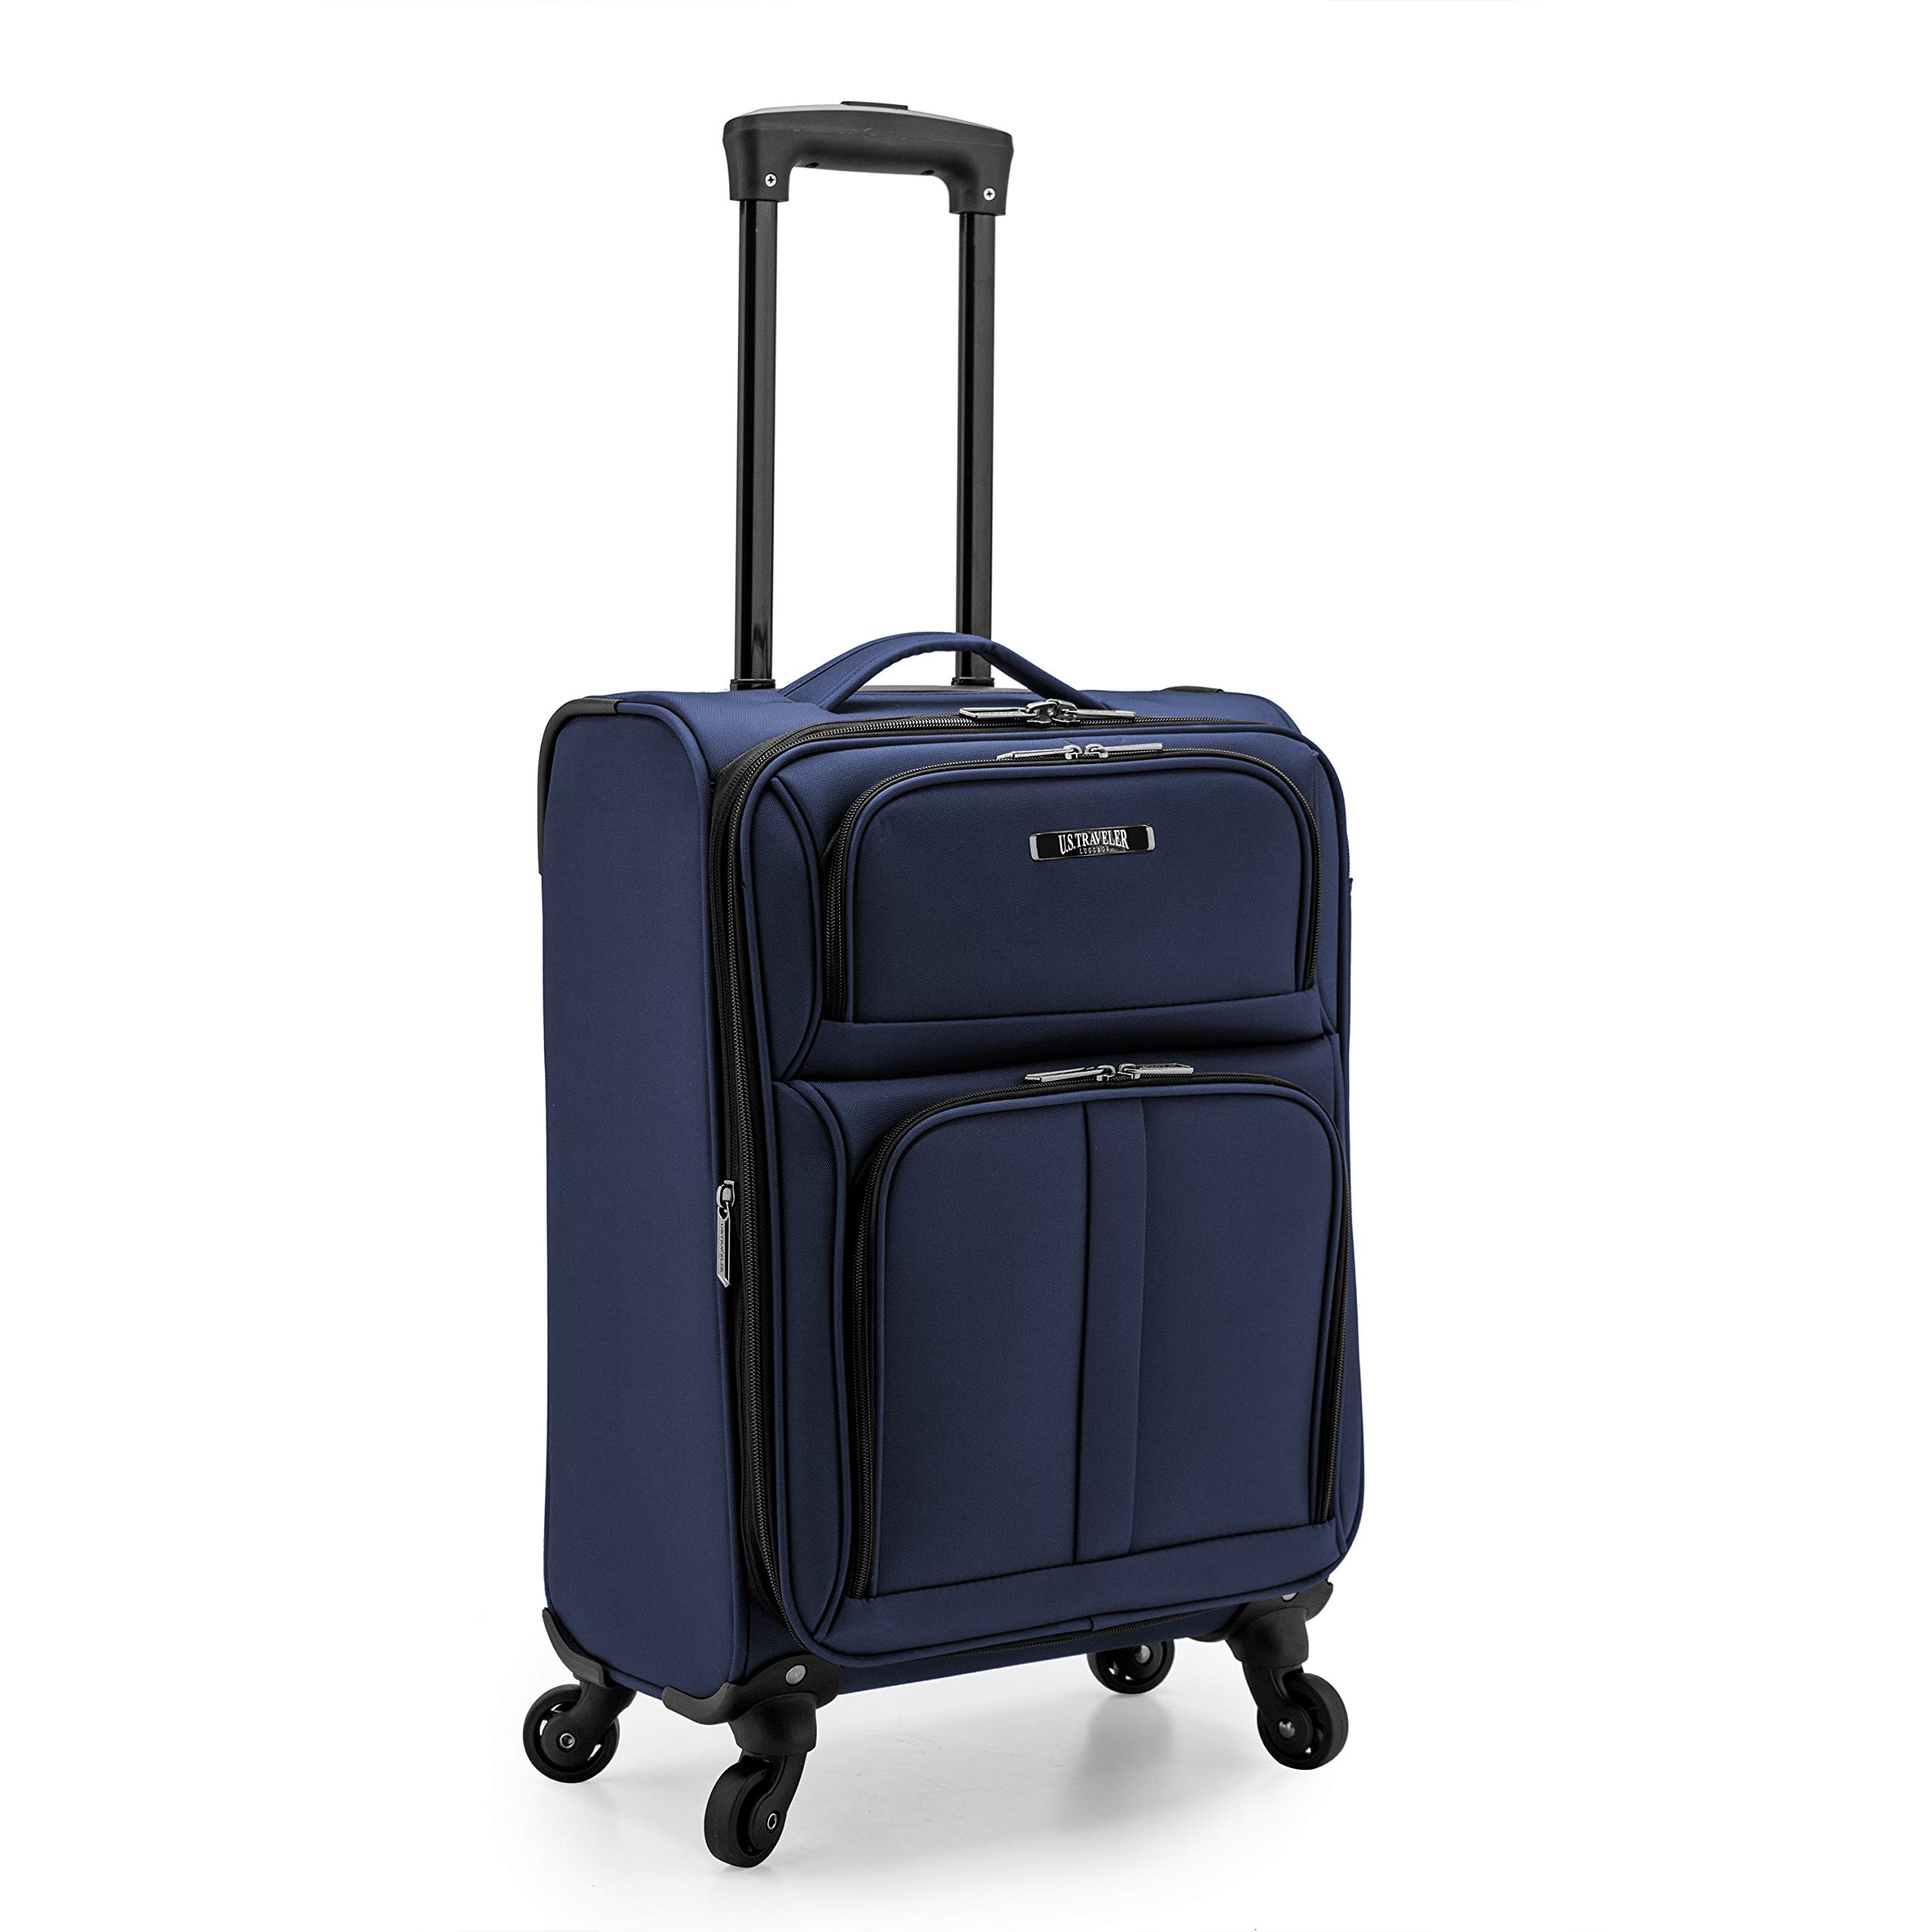 US Traveler Anzio Softside Expandable Spinner Luggage, Navy, carry-on 22-Inch